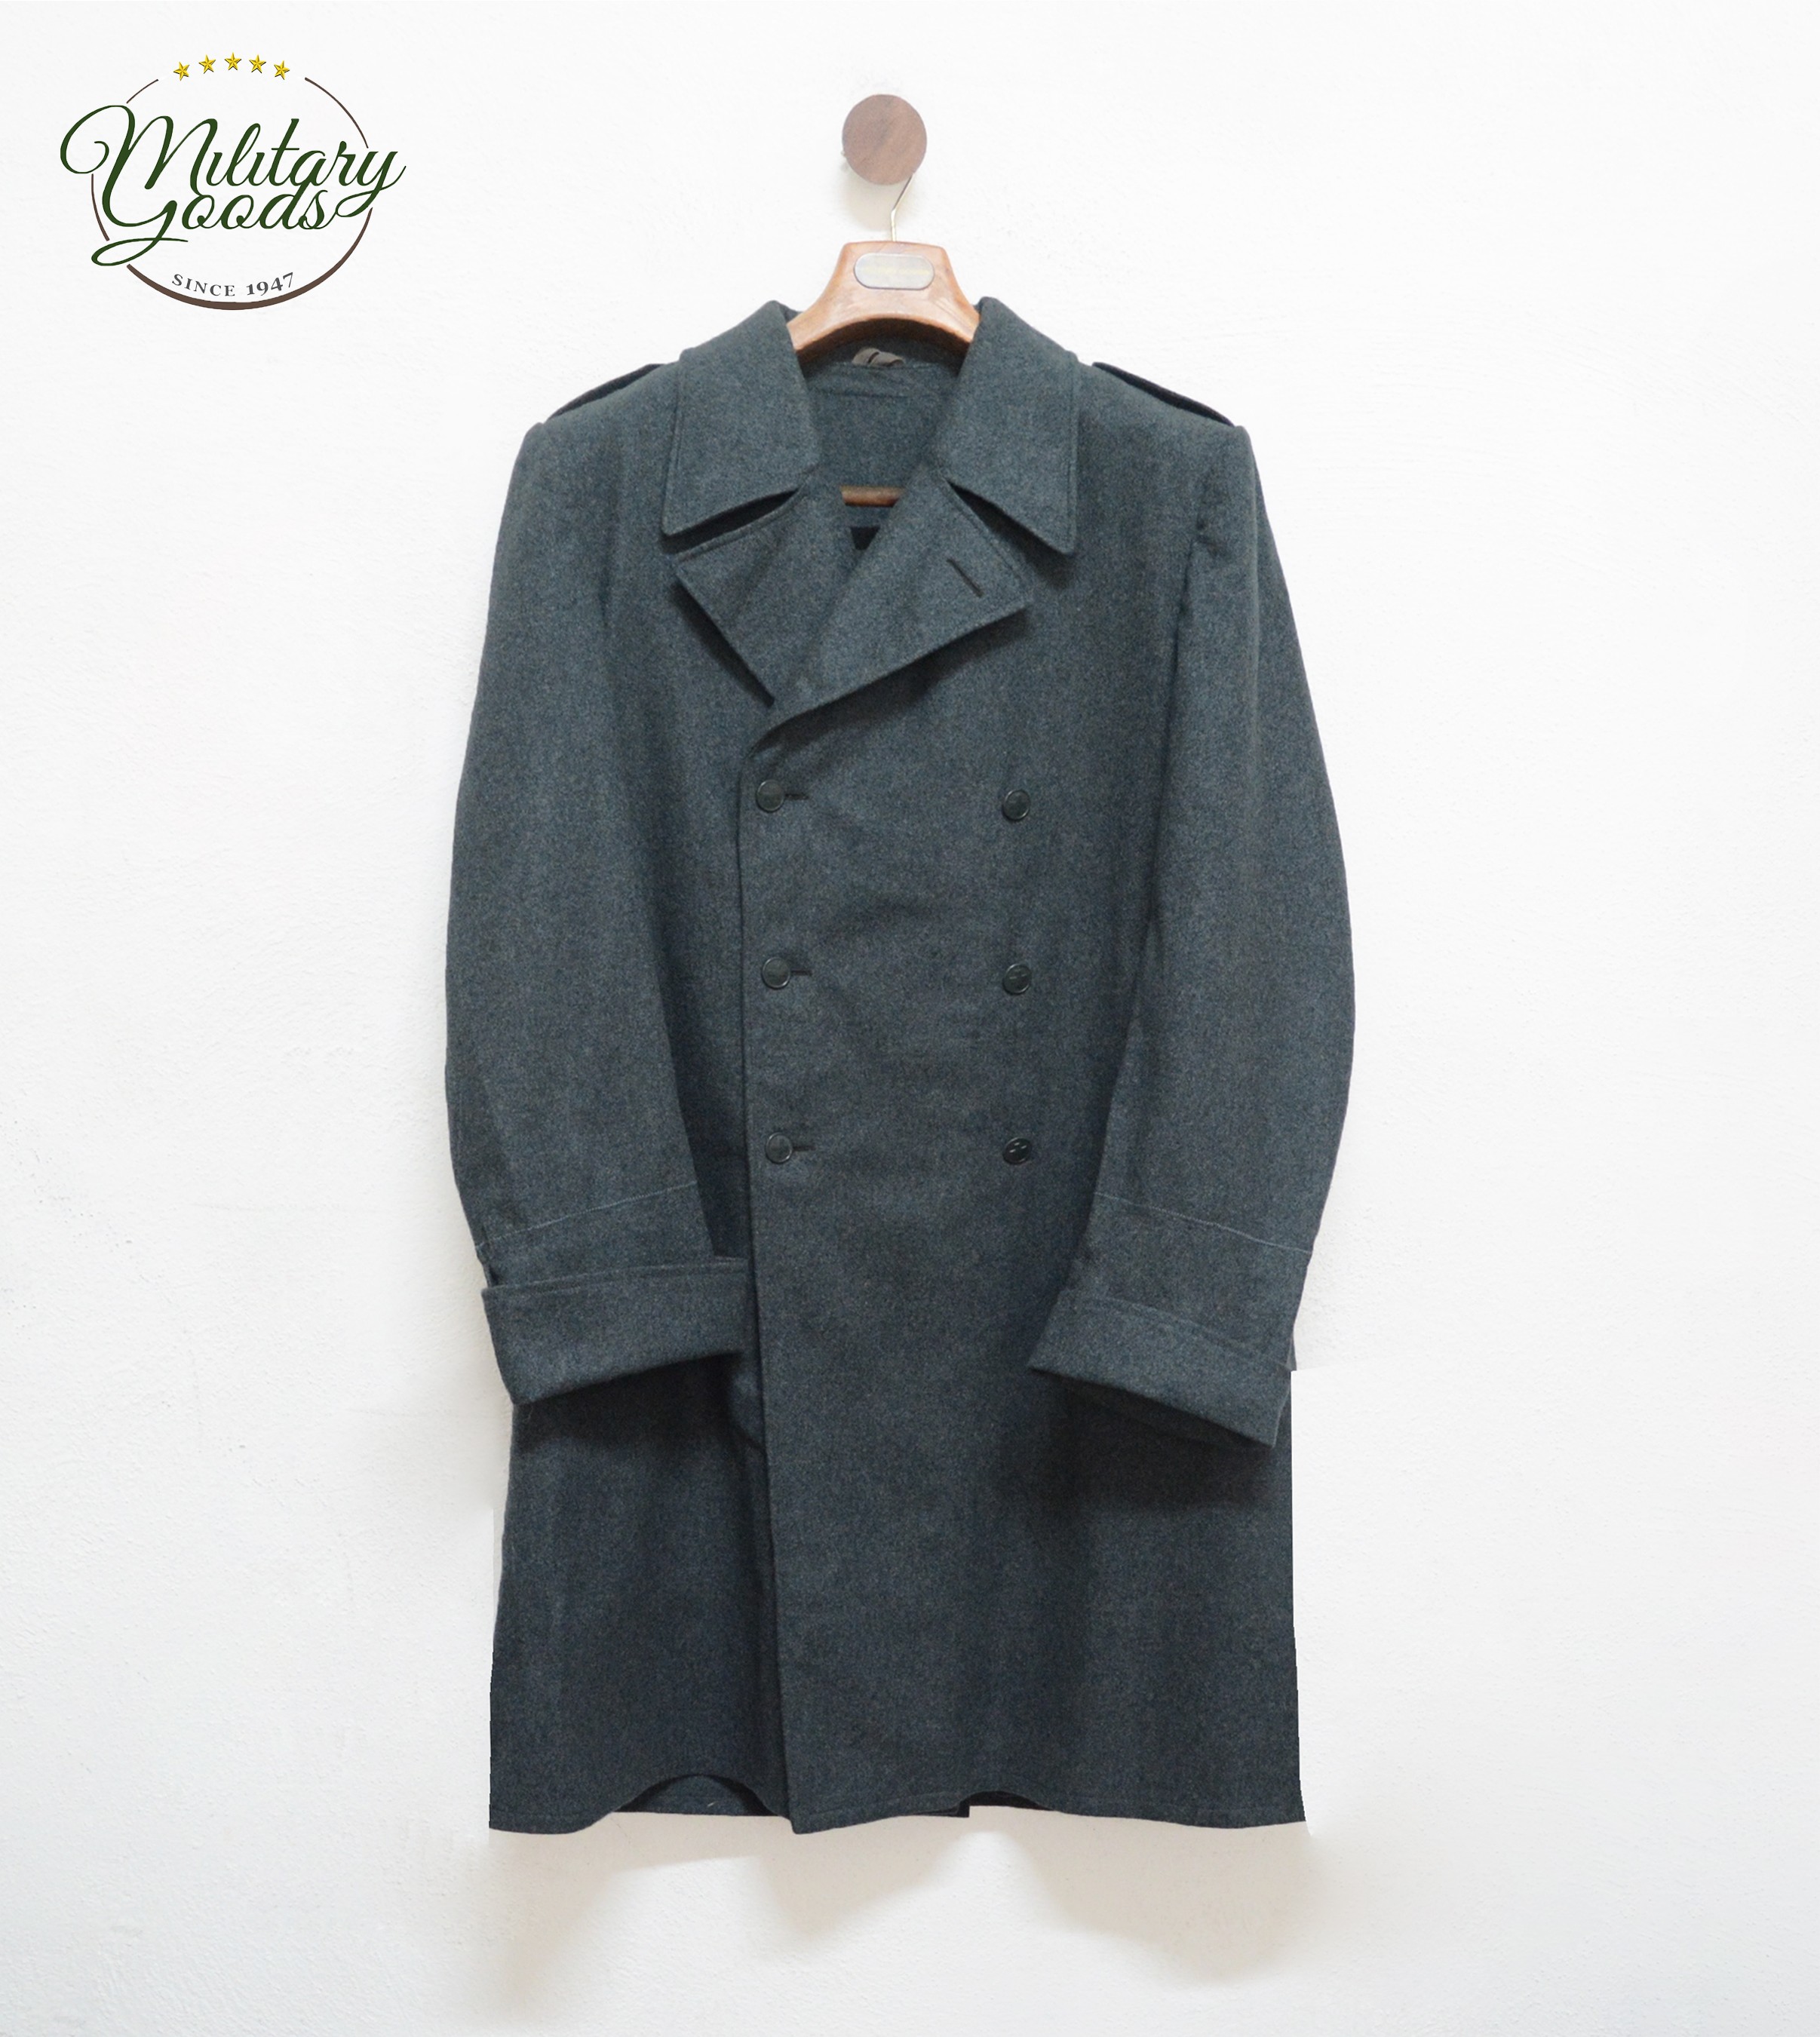 Swiss Army Military Coat in Double-Breasted Wool